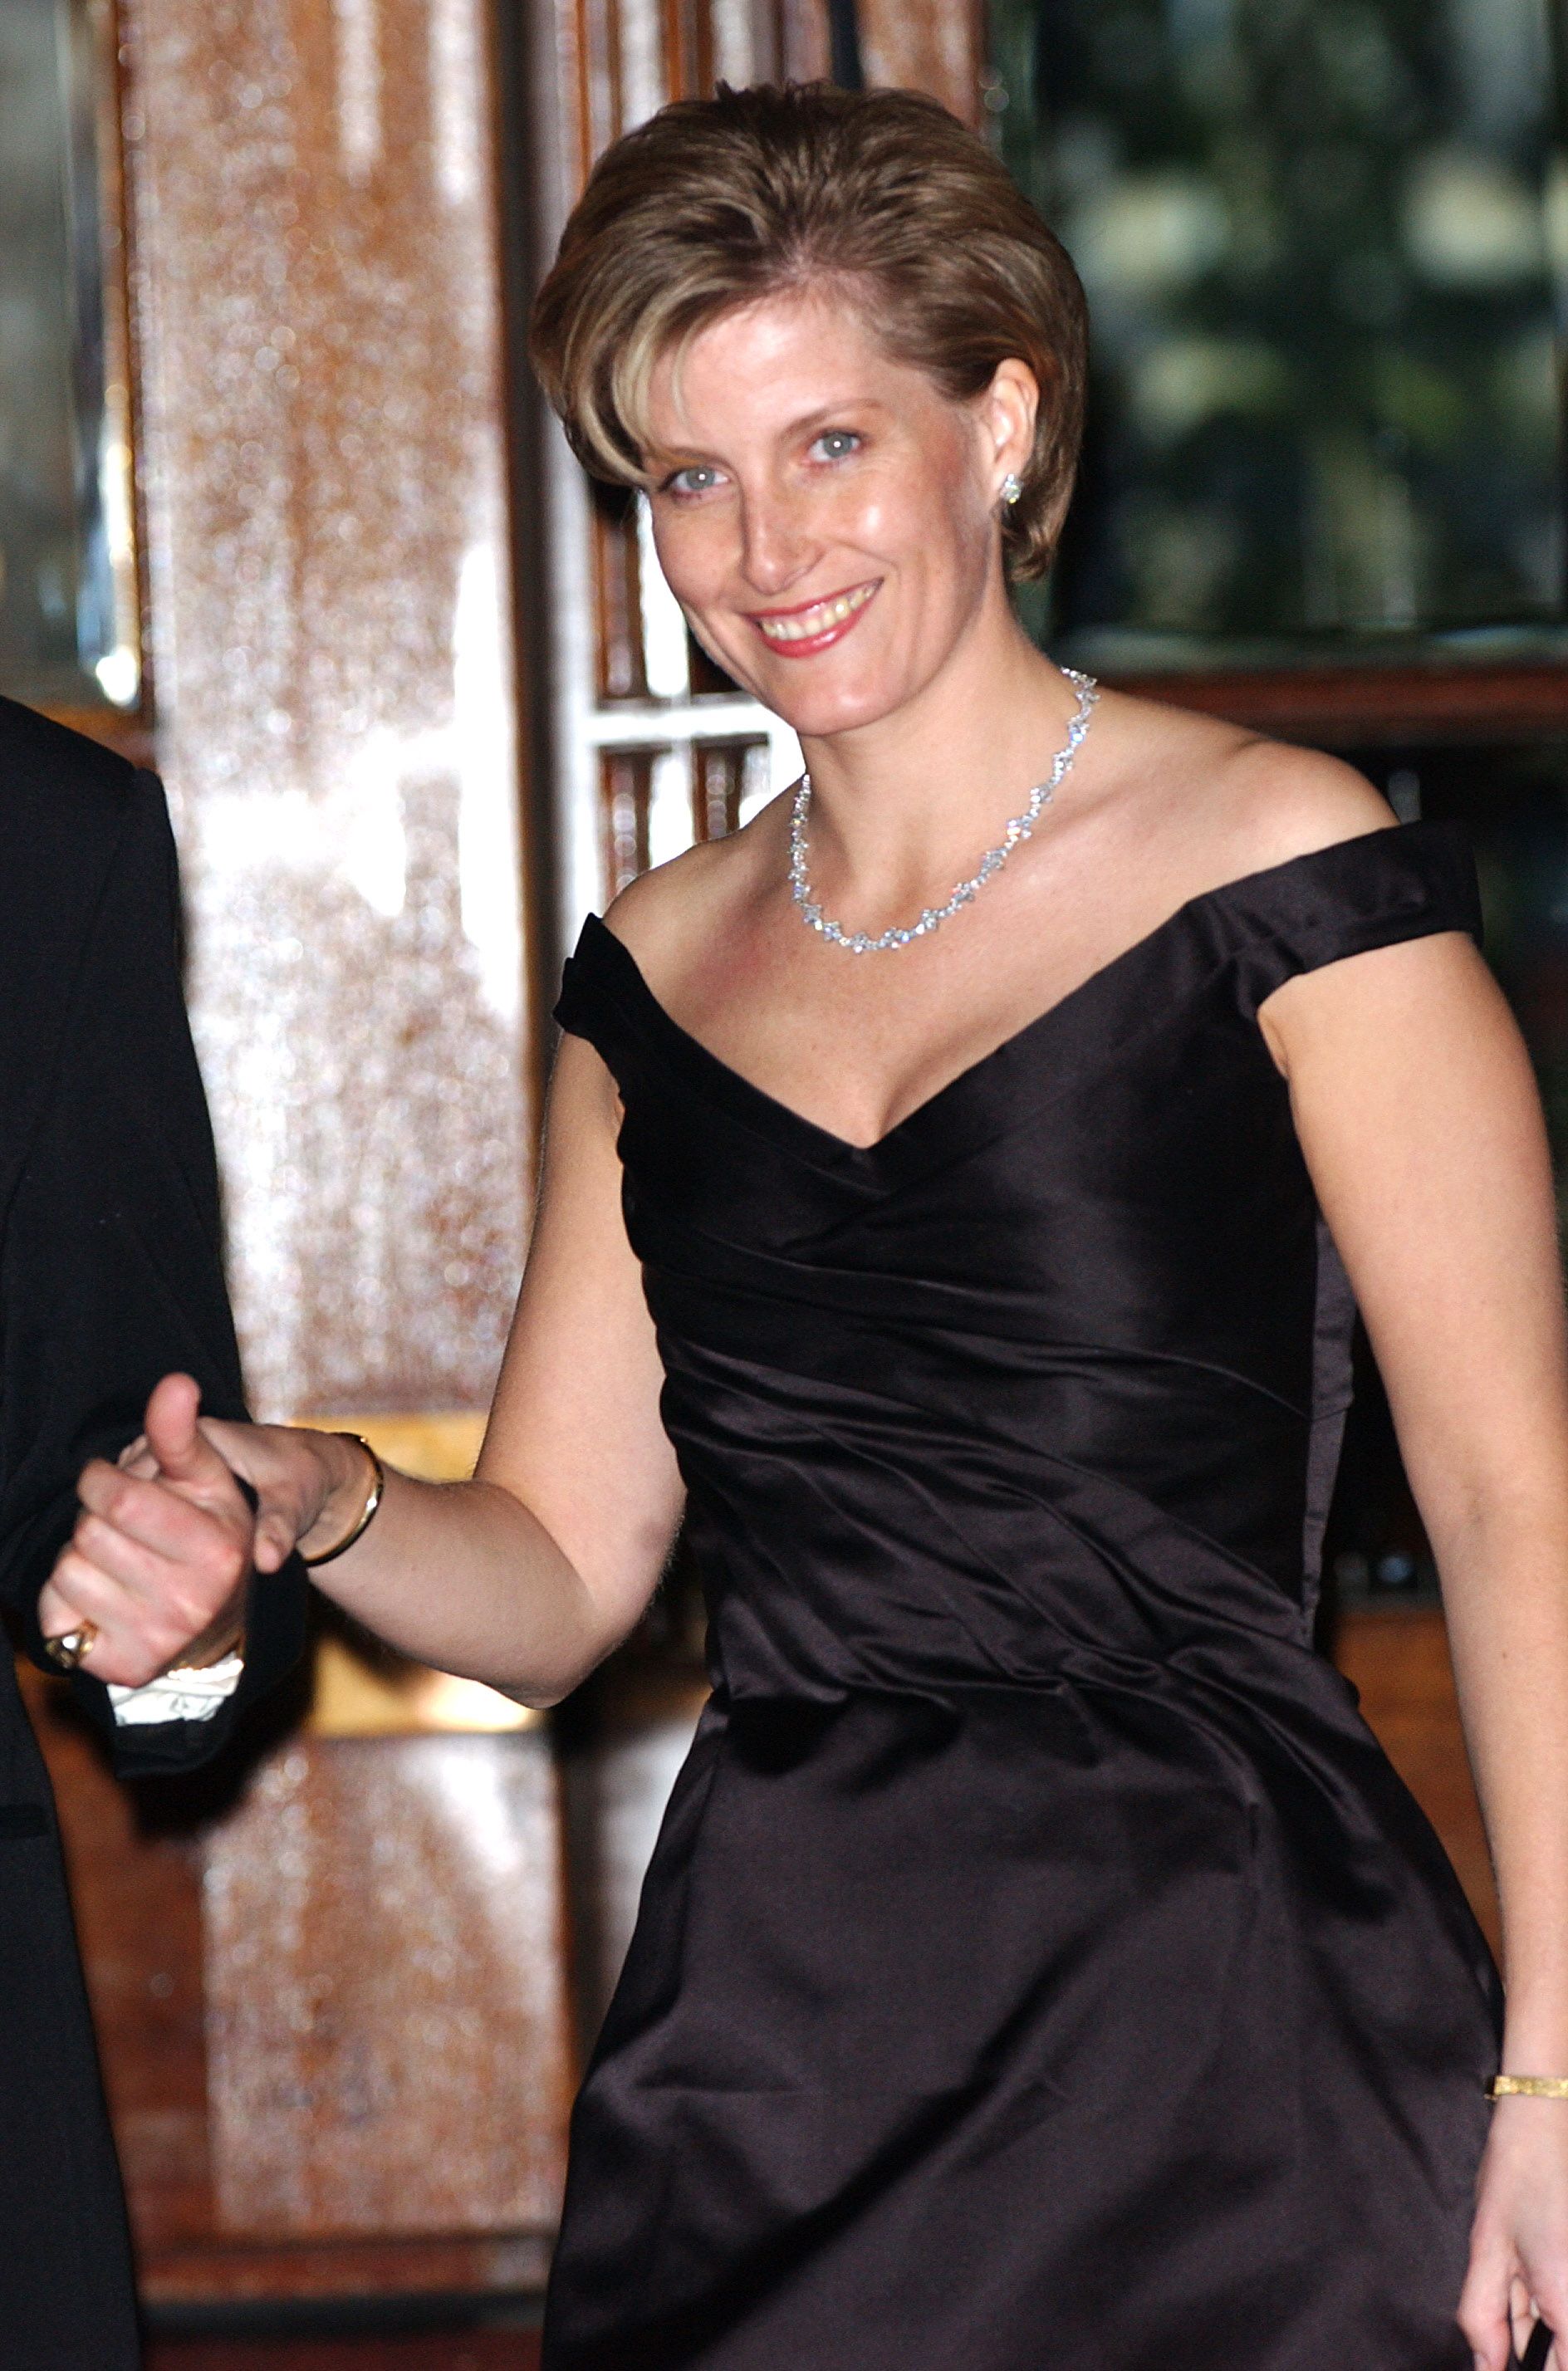 the-countess-of-wessex-attends-a-party-at-the-ritz-hosted-news-photo-1582823186.jpg